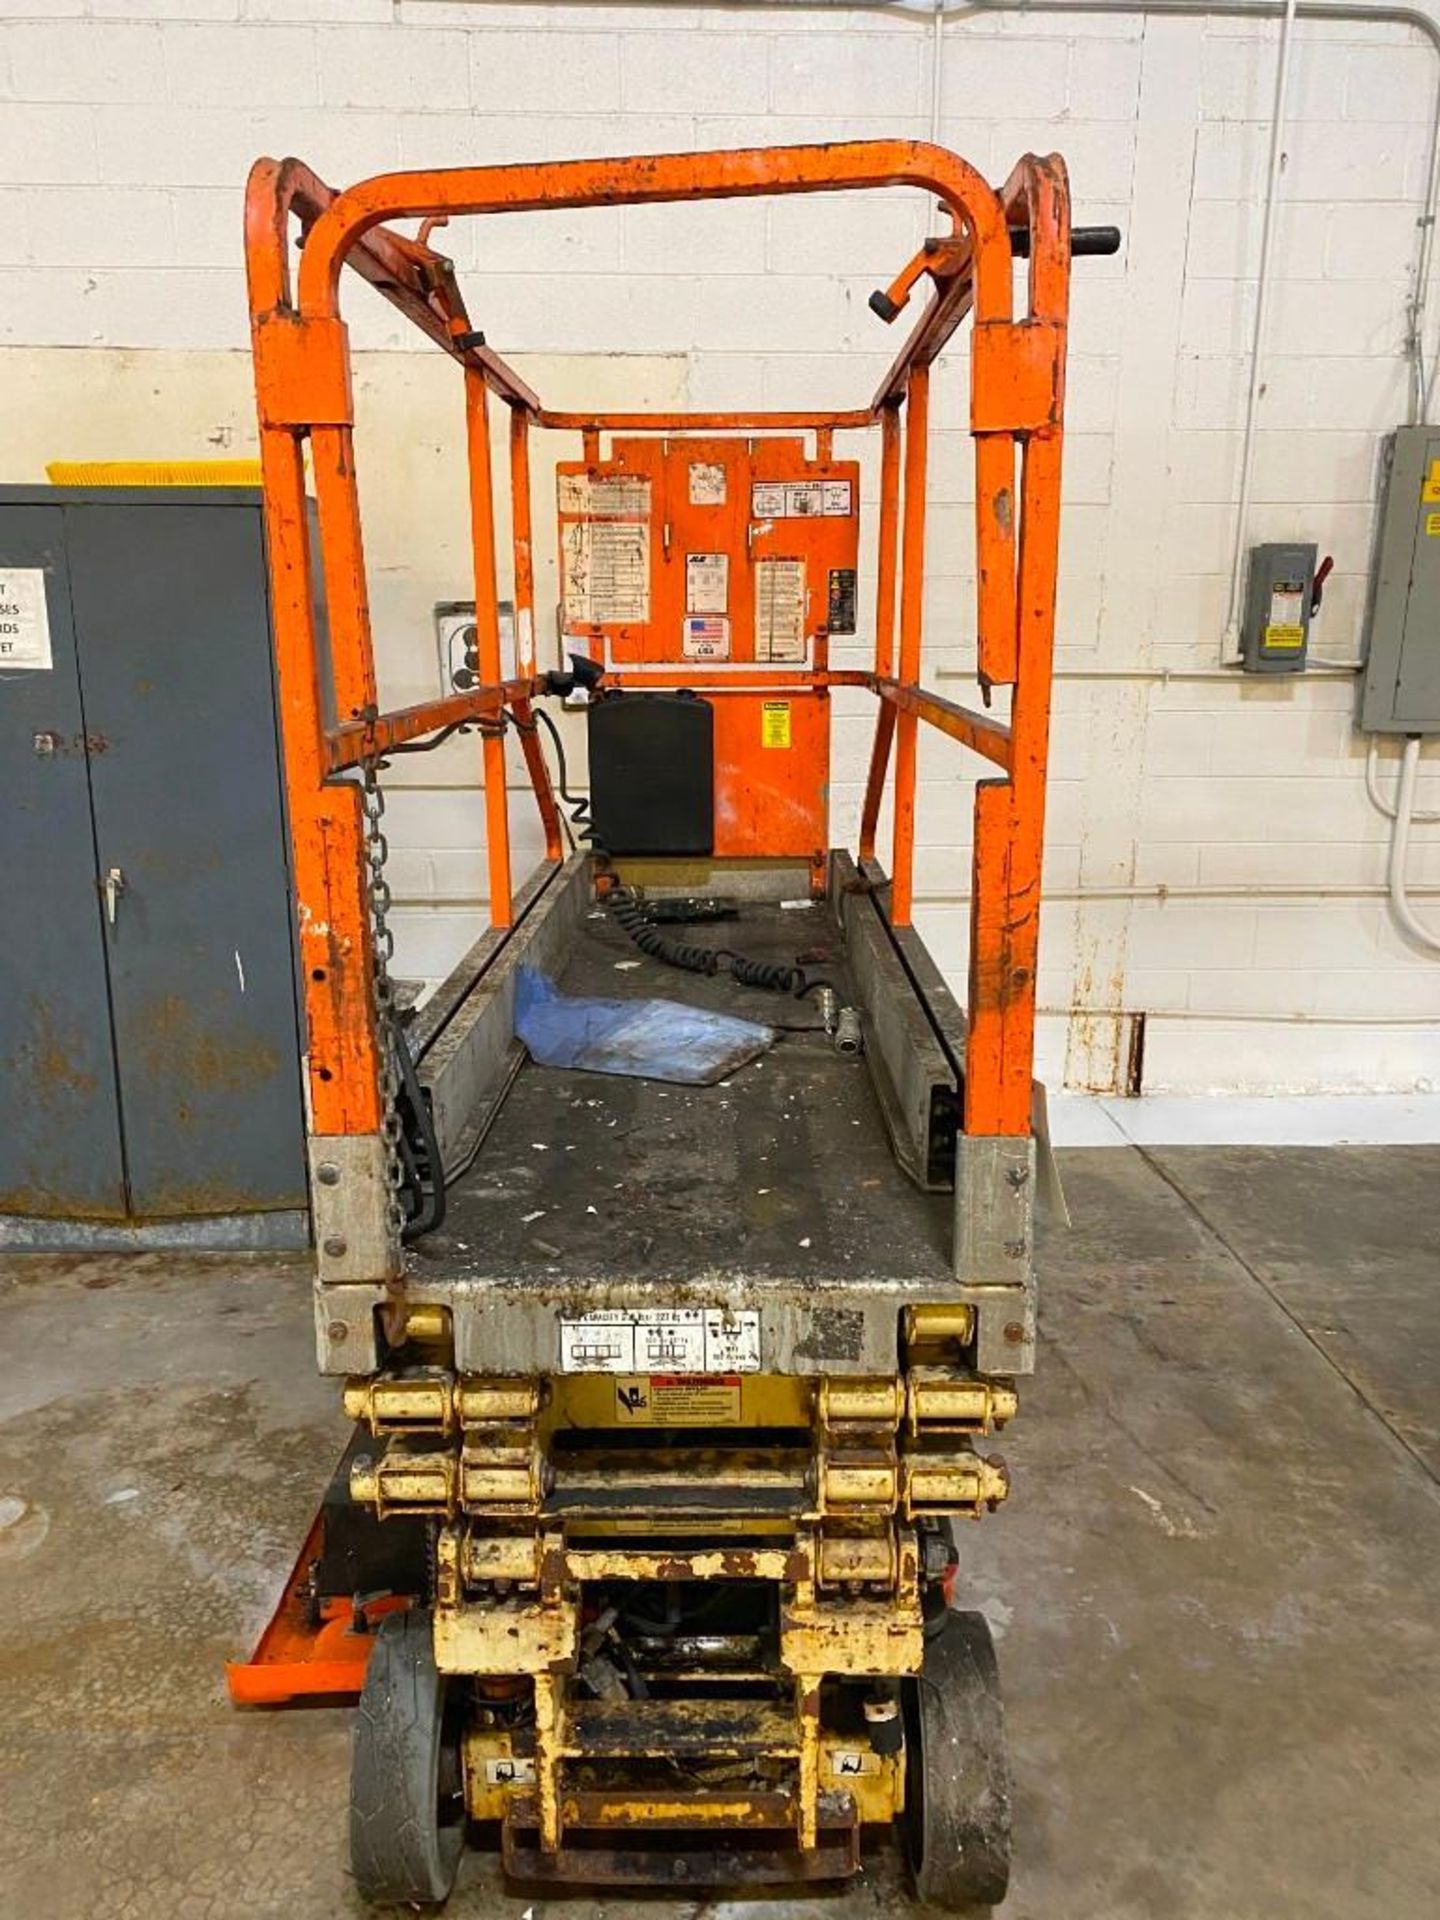 JLG 1930ES PRO FIT SERIES ELECTRIC MANLIFT- NON FUNCTIONAL - Image 2 of 8